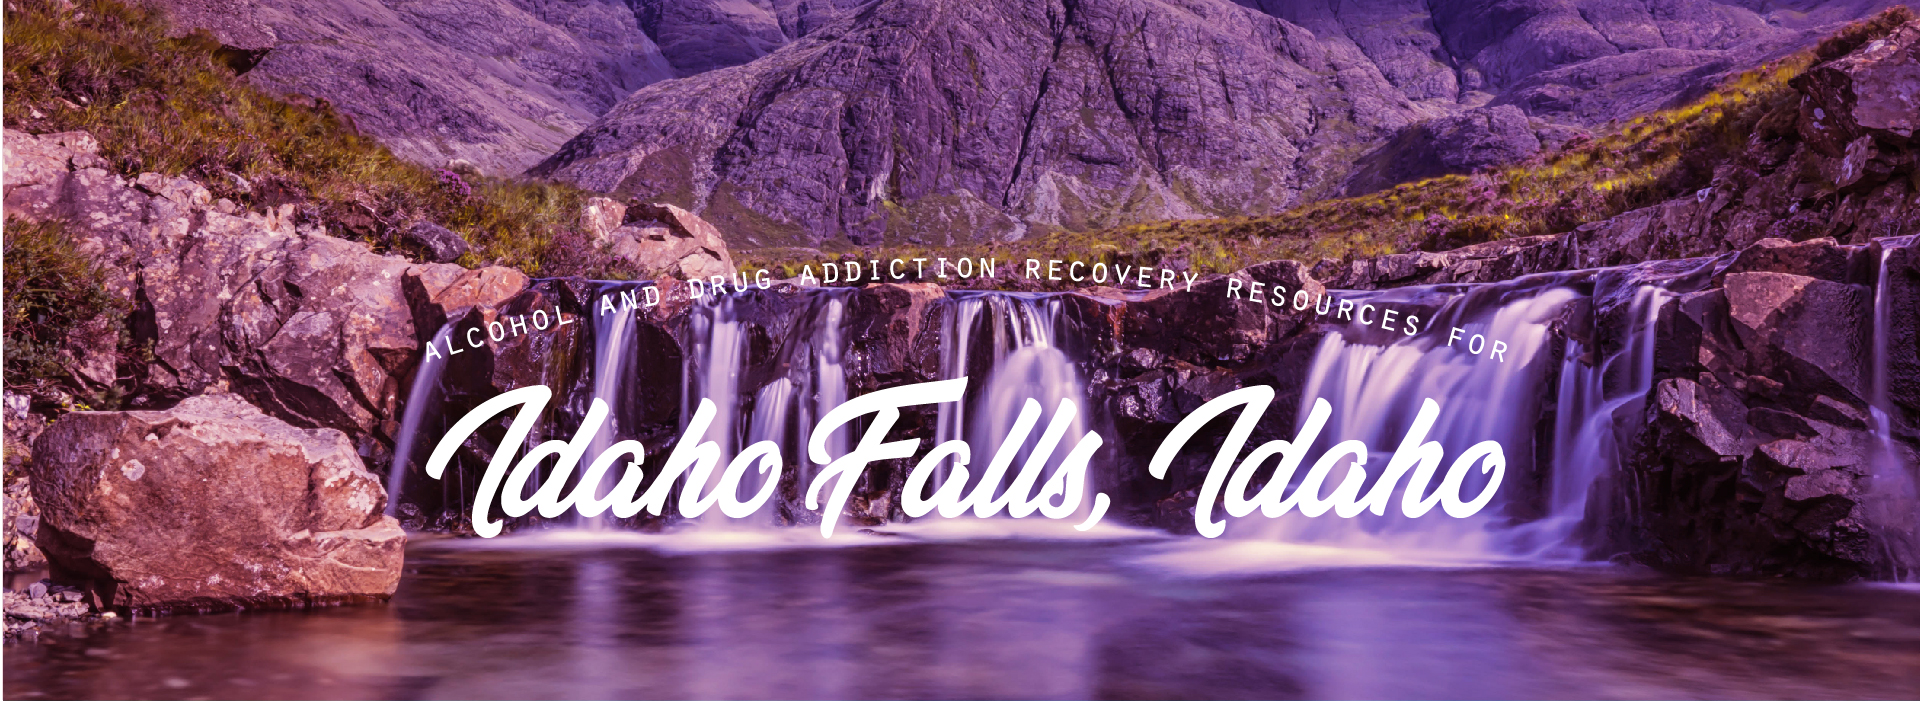 Alcohol and drug addiction recovery resources for Idaho Falls, Idaho